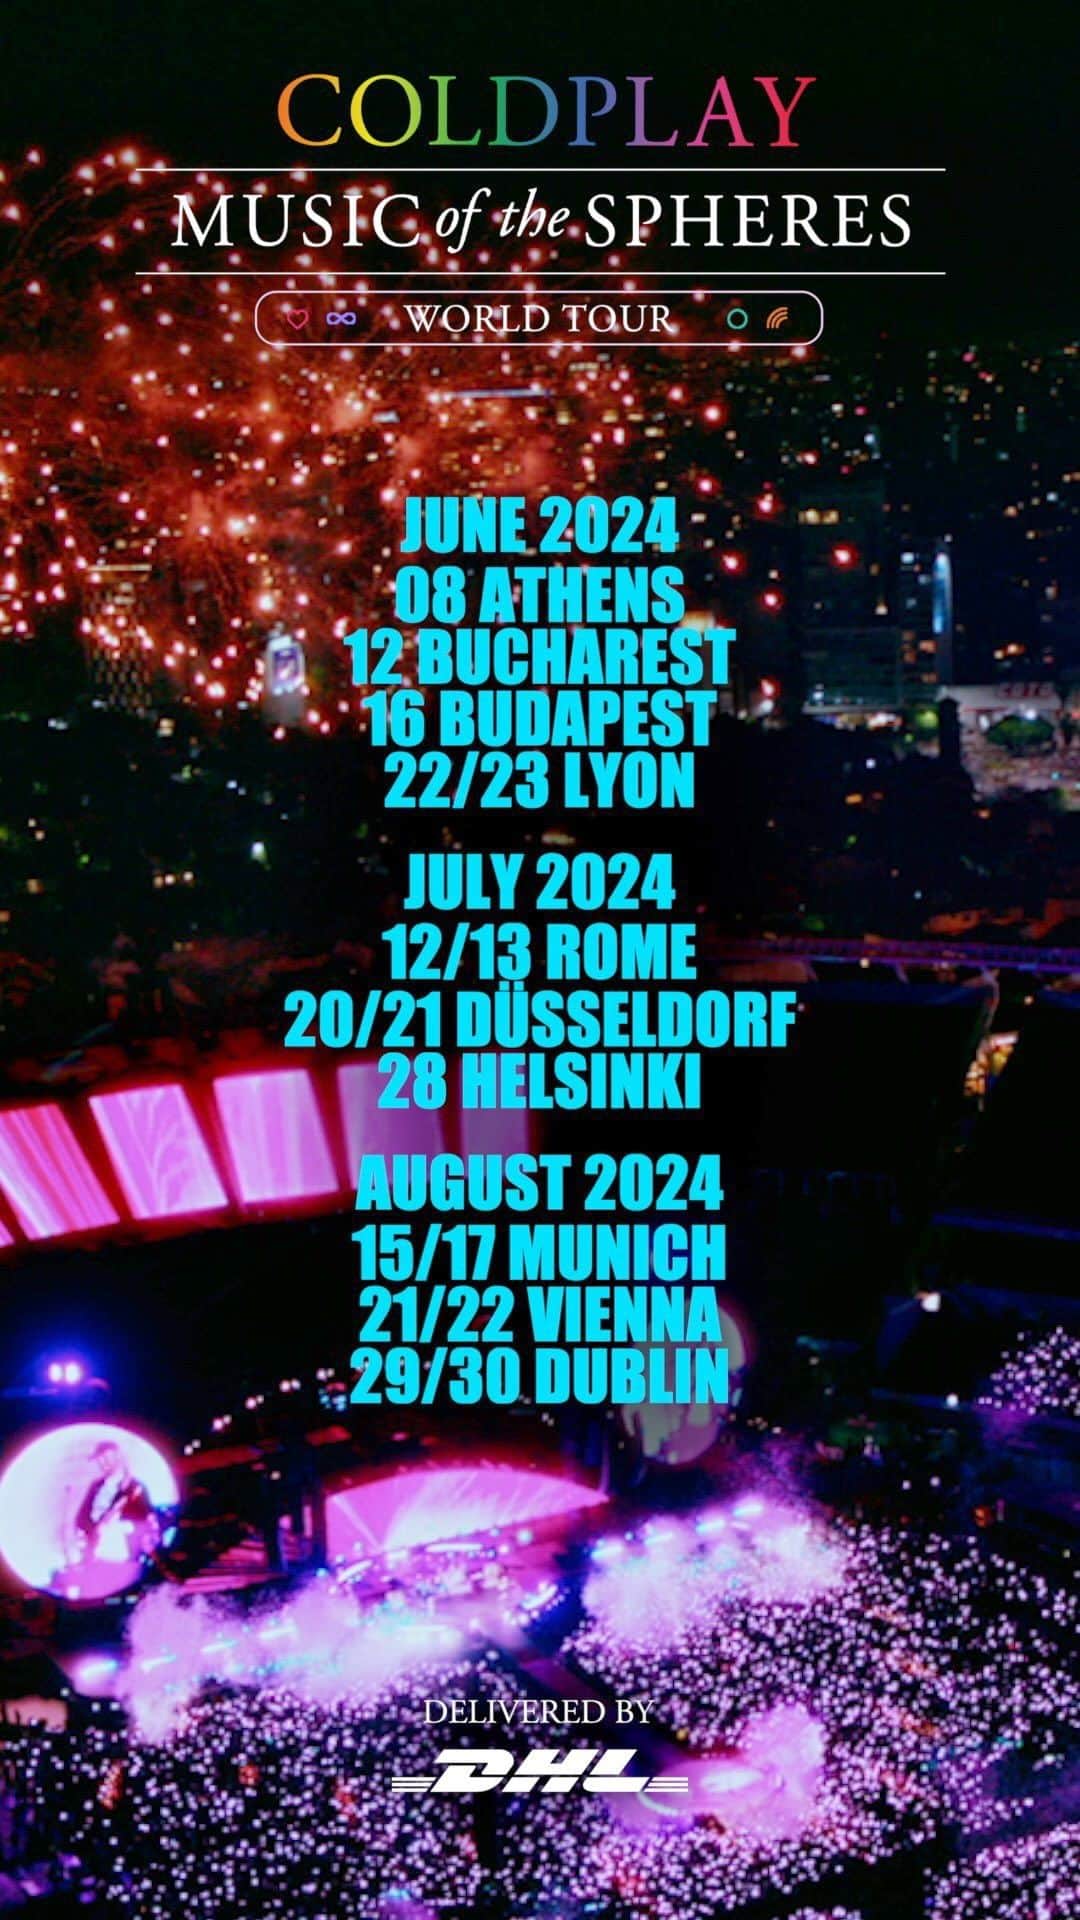 Coldplayのインスタグラム：「NEW EUROPEAN 2024 DATES ANNOUNCED Register at Coldplay.com for first access to tickets - presale begins Tuesday, July 25.  JUNE 2024 8: Athens - Olympic Stadium  12: Bucharest - Arena Națională 16: Budapest - Puskás Aréna 22: Lyon - Groupama Stadium 23: Lyon - Groupama Stadium  JULY 2024 12: Rome - Stadio Olimpico 13: Rome - Stadio Olimpico 20: Düsseldorf - Merkur Spiel-Arena 21: Düsseldorf - Merkur Spiel-Arena 28: Helsinki - Olympiastadion  AUGUST 2024 15: Munich - Olympiastadion 17: Munich - Olympiastadion 21: Vienna - Ernst-Happel-Stadion 22: Vienna - Ernst-Happel-Stadion 29: Dublin - Croke Park 30: Dublin - Croke Park  General sale begins on Friday, July 28.  #MusicOfTheSpheresWorldTour delivered by @dhl_global  #Coldplay #MOTSWT #DHL×Coldplay」